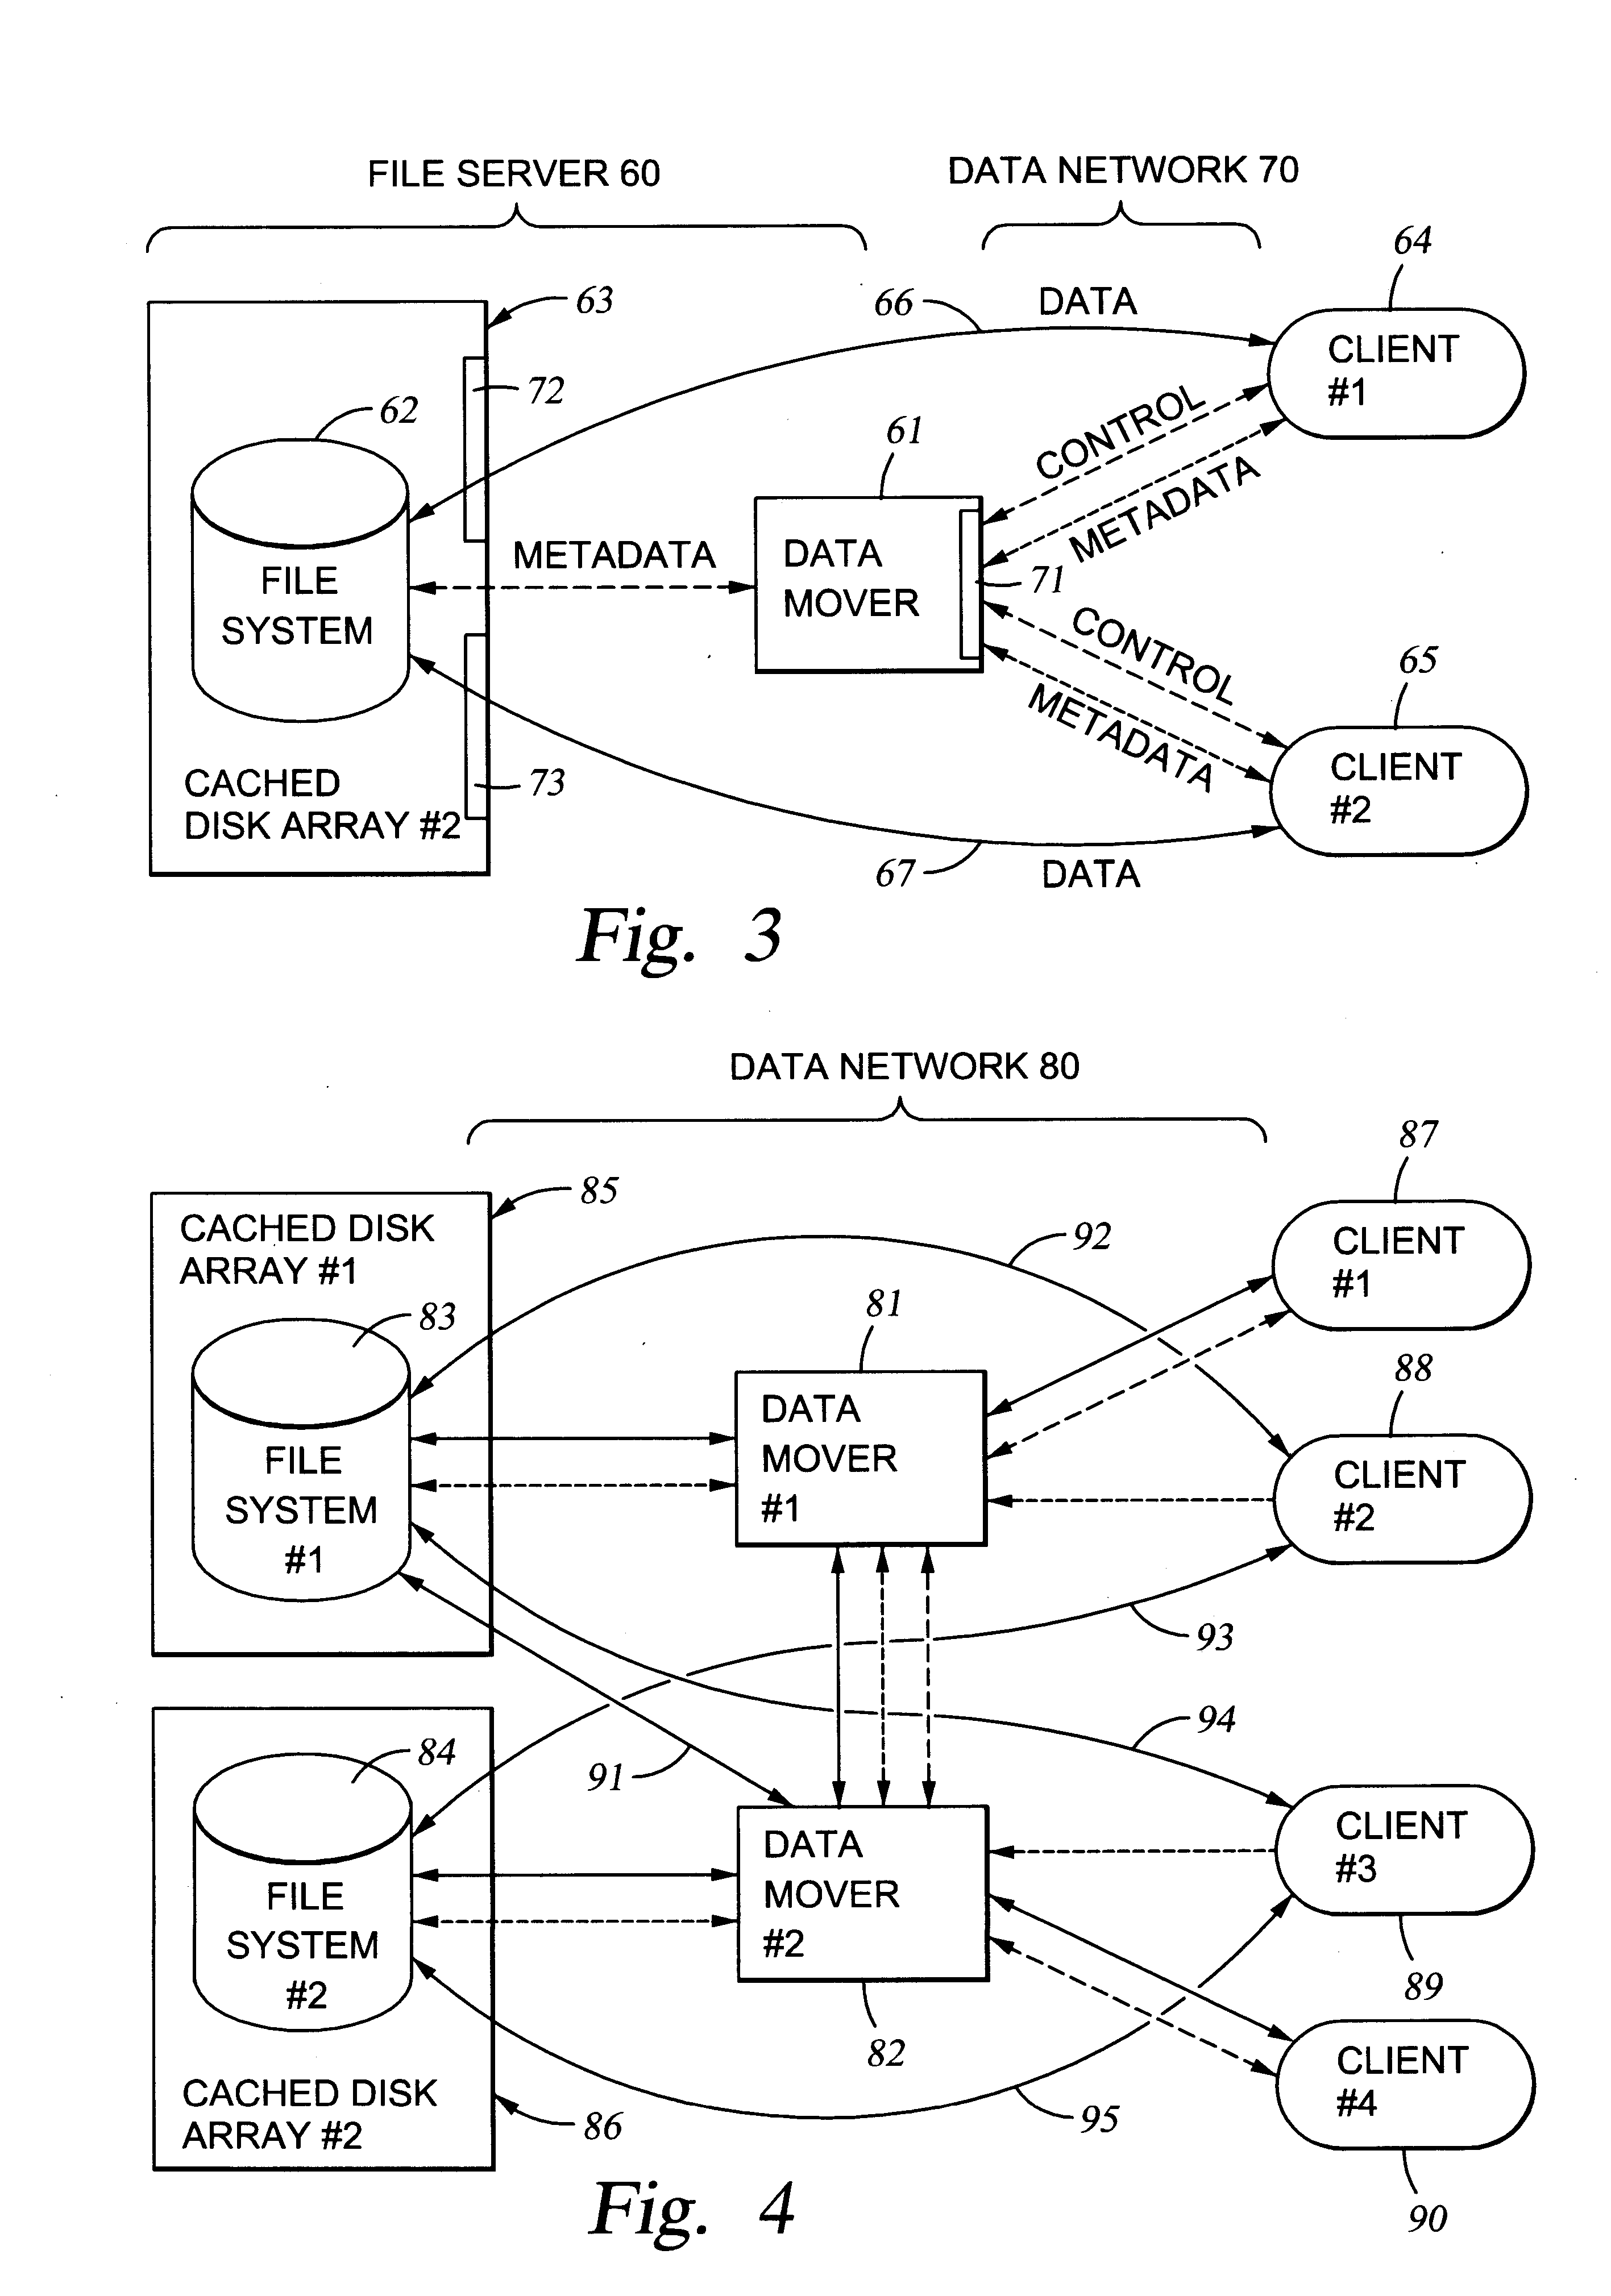 File server system using file system storage, data movers, and an exchange of meta data among data movers for file locking and direct access to shared file systems